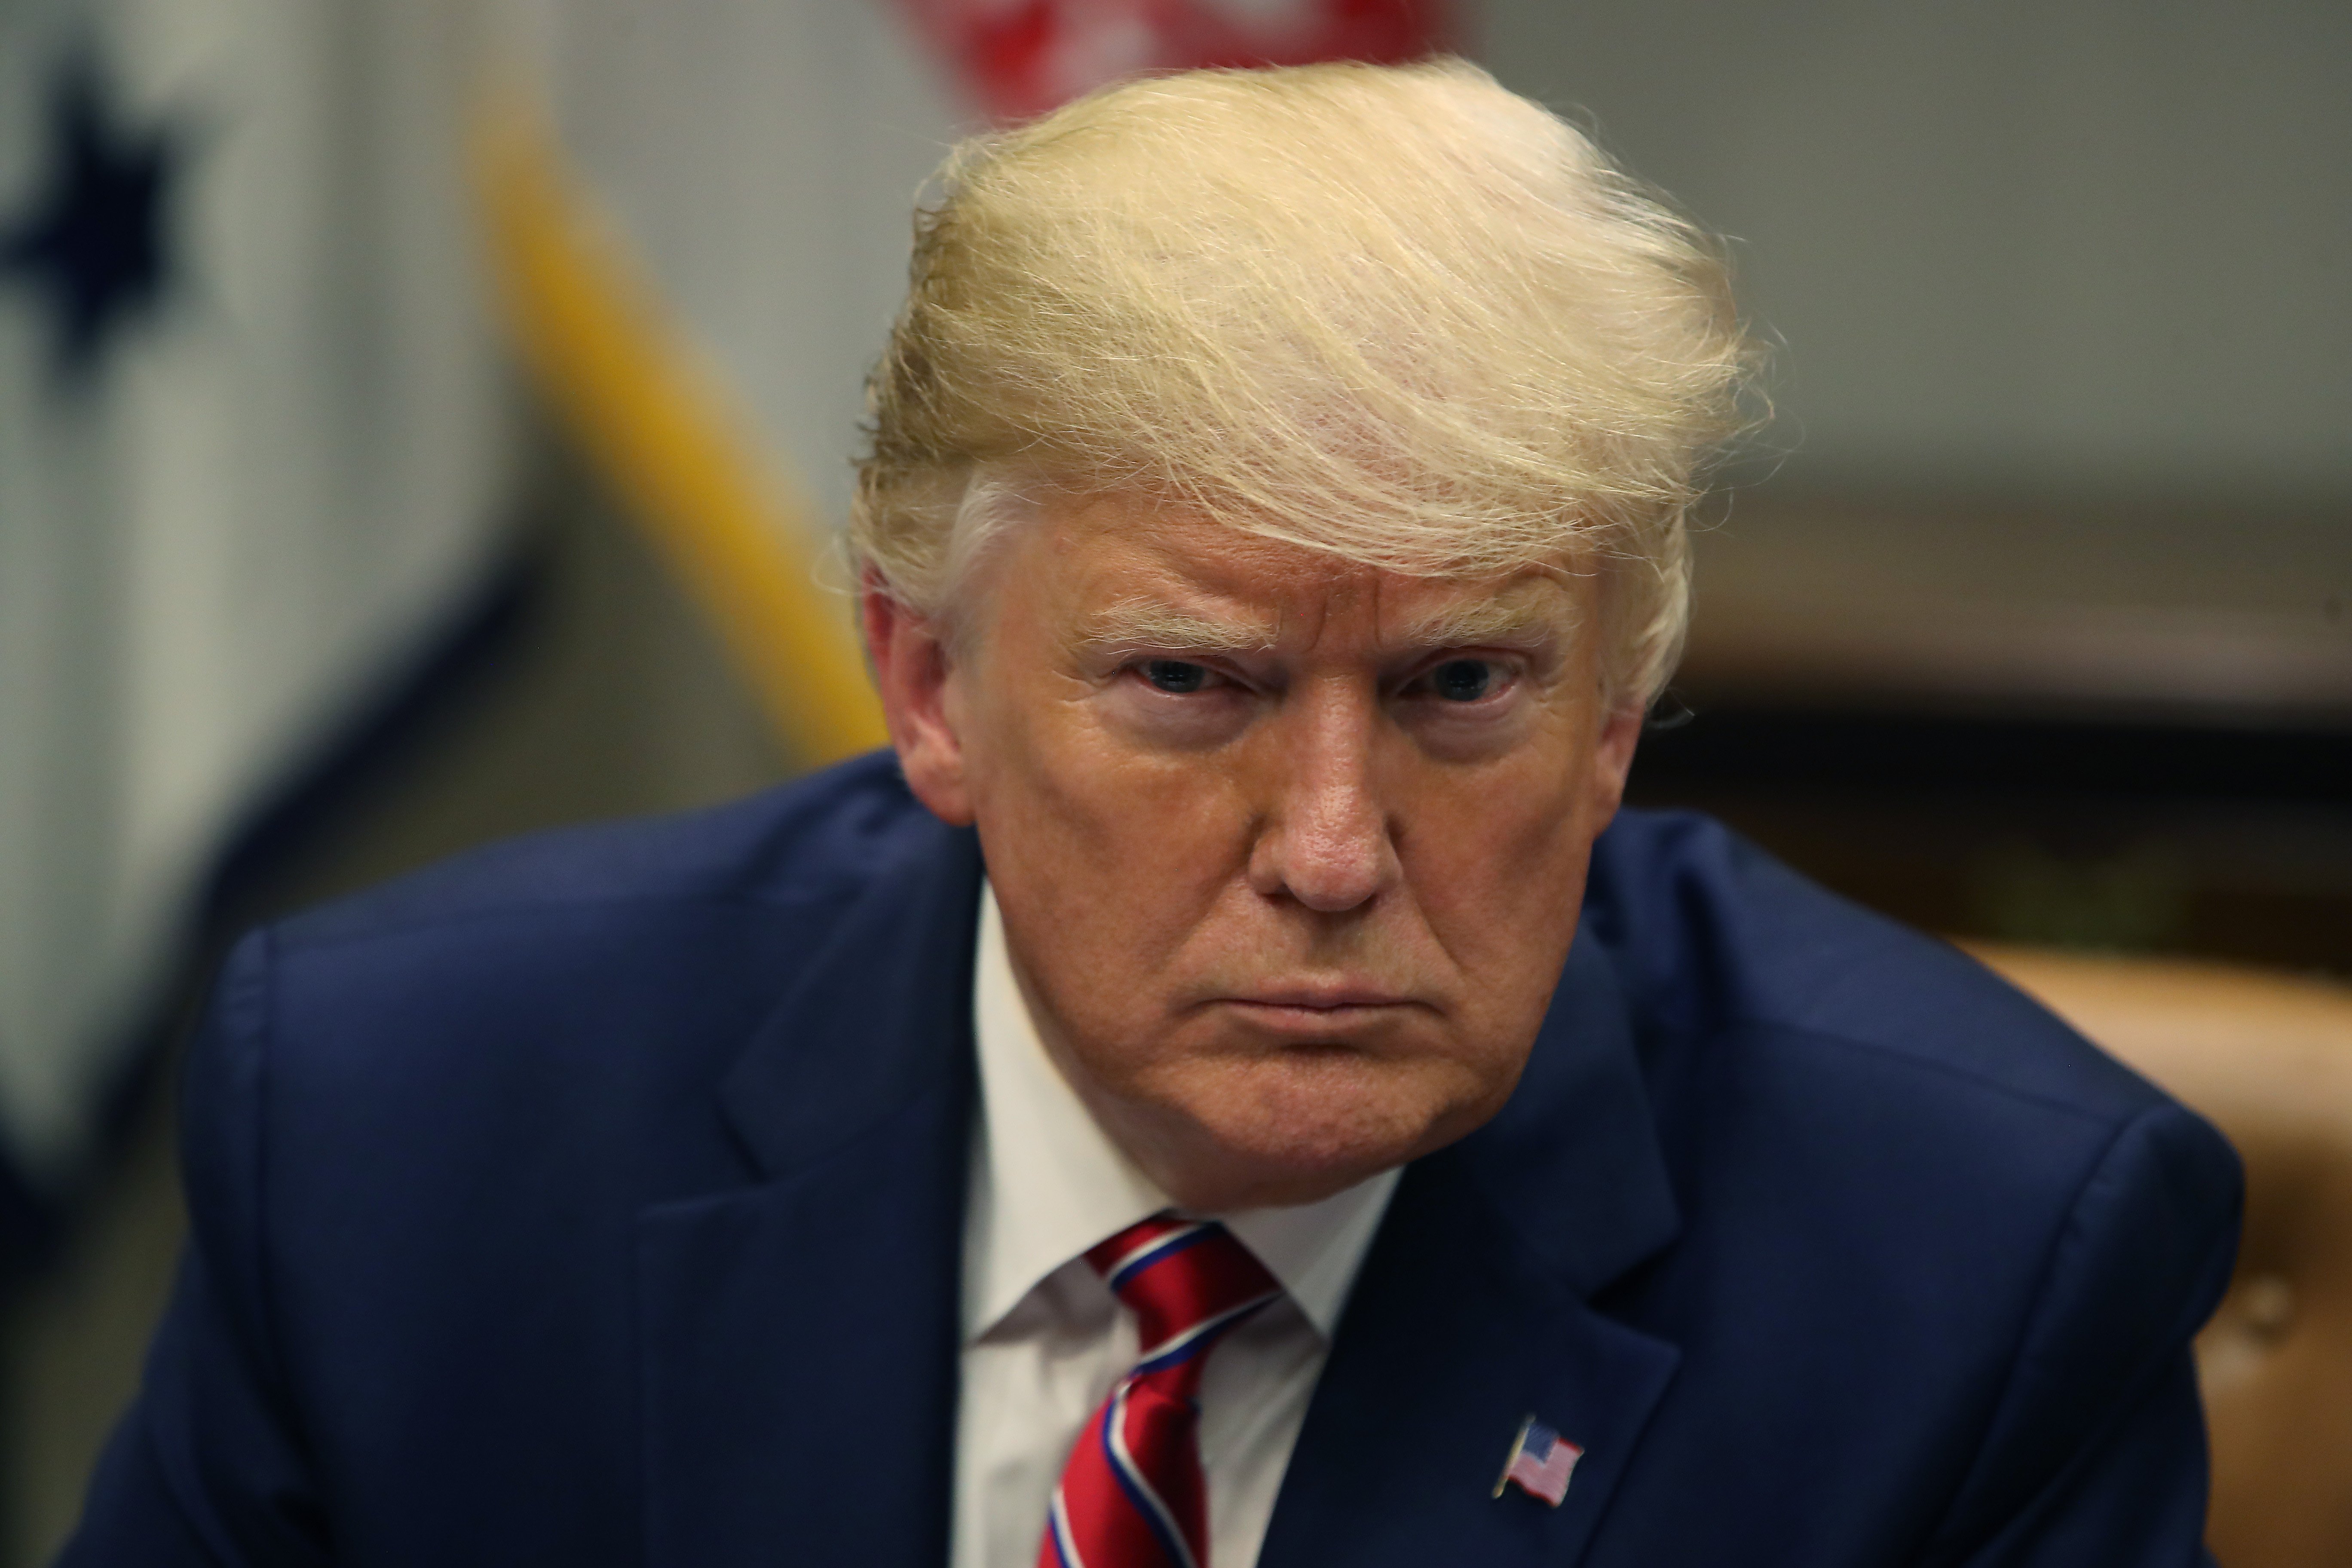 Donald Trump participates in a roundtable discussion on the administration's efforts to combat the opioid epidemic, in the Roosevelt Room at the White House on June 12, 2019 | Photo: GettyImages